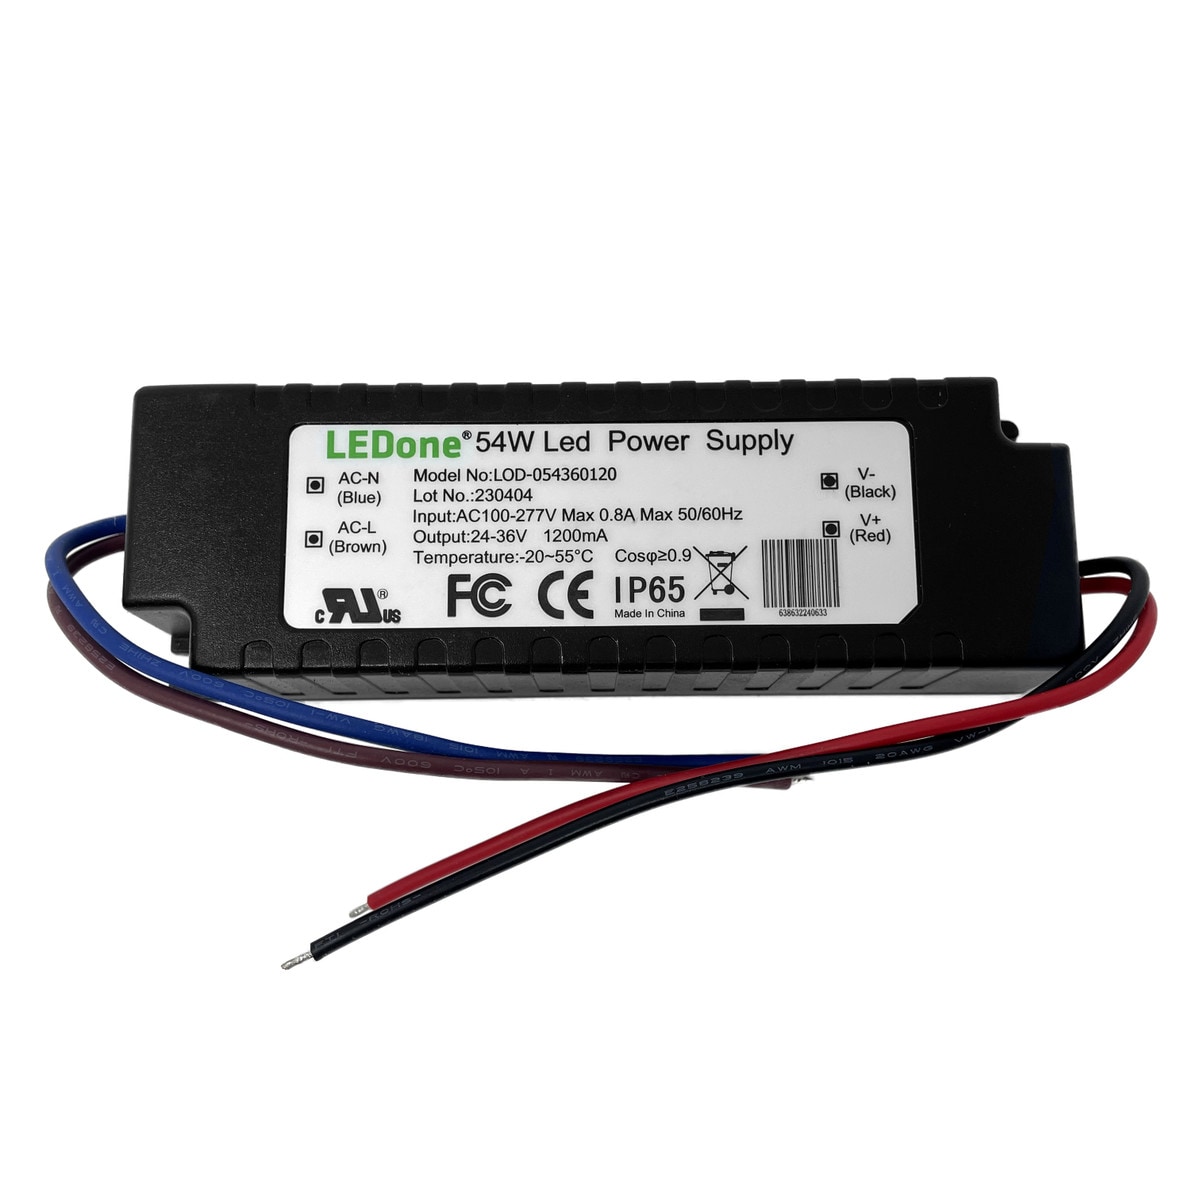 LED Drivers for Sale  Best LED Power Supplies in the USA for Sale